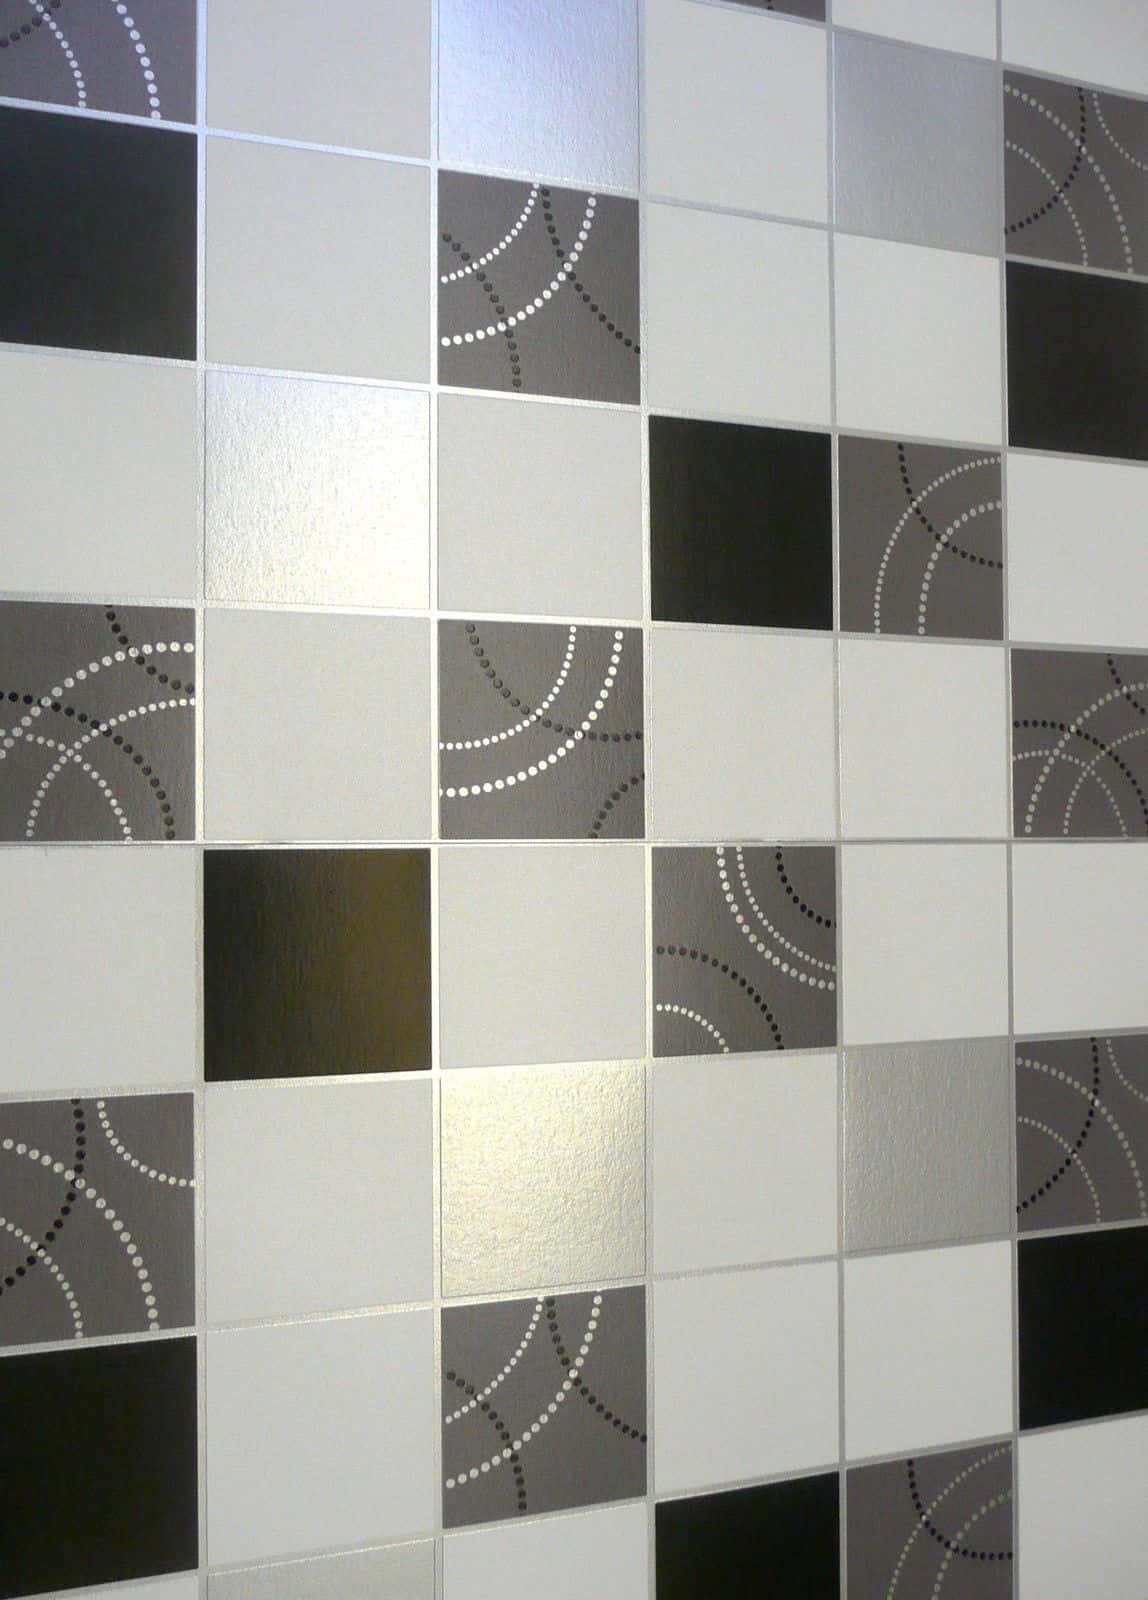 Exquisite Abstract Tile Pattern